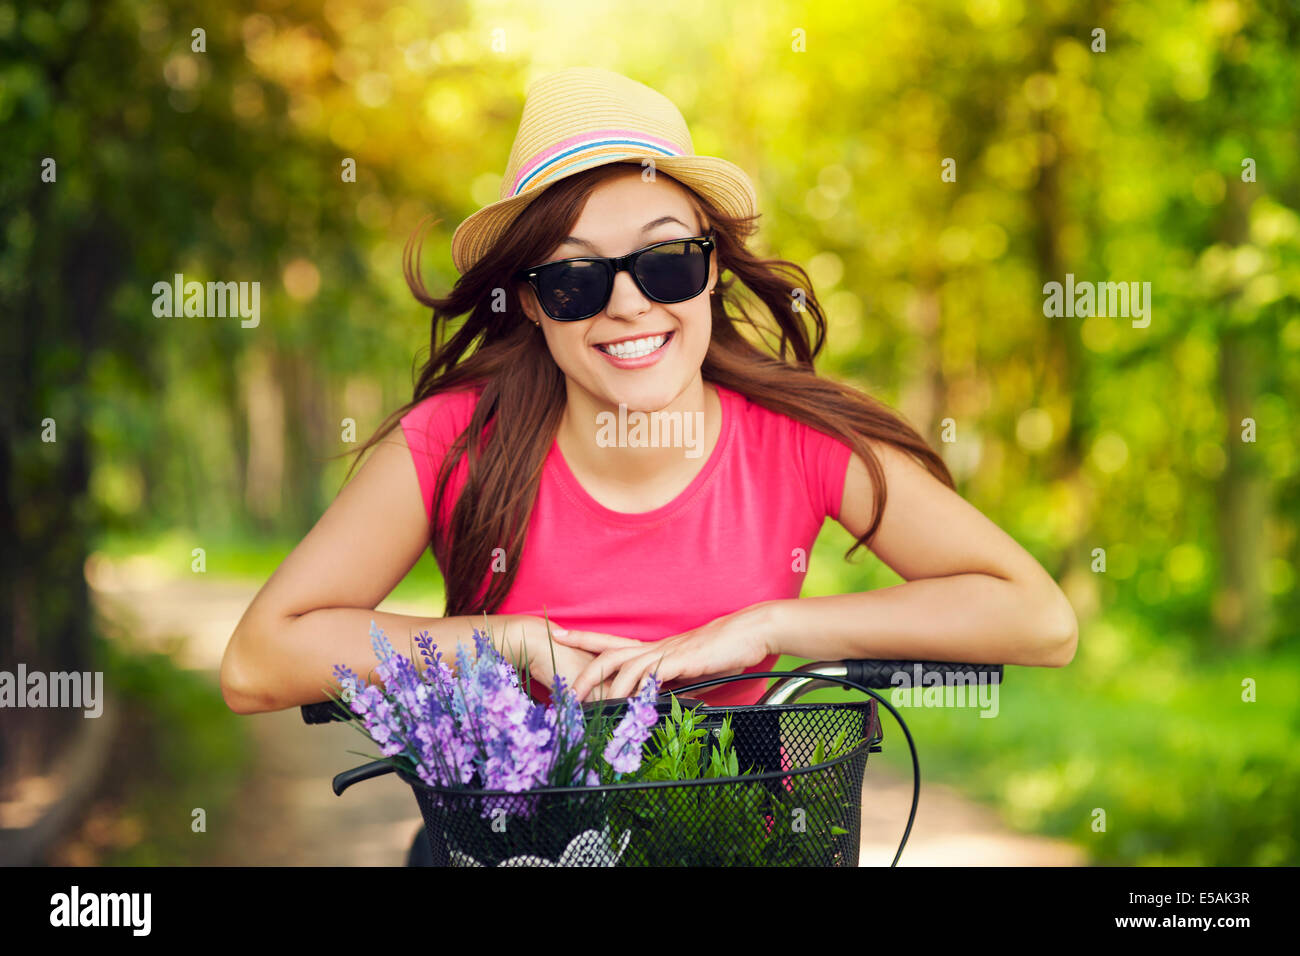 Portrait of smiling woman riding bicycle in park, Debica, Poland. Stock Photo